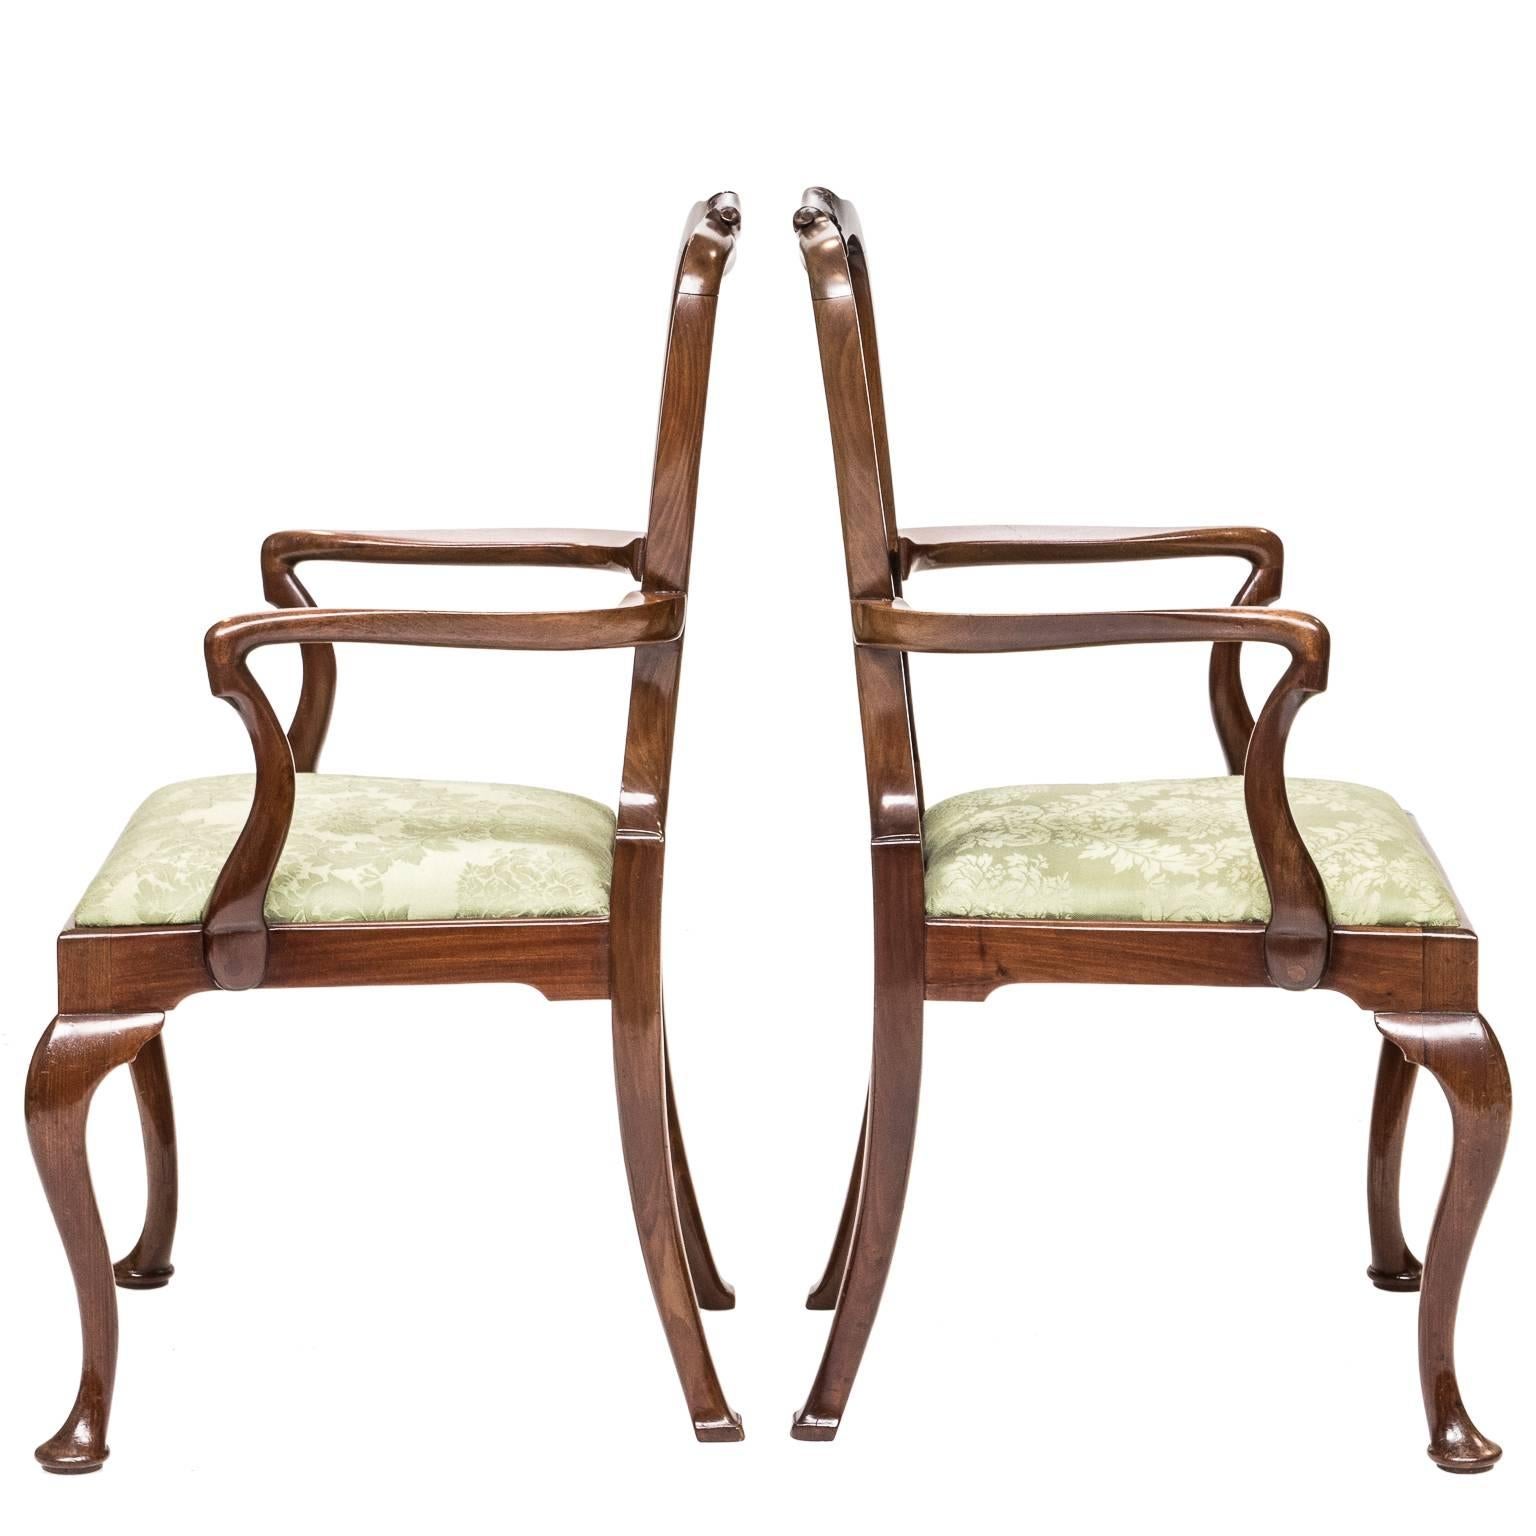 Woodwork Pair of 19th Century Queen Anne Childs Chairs